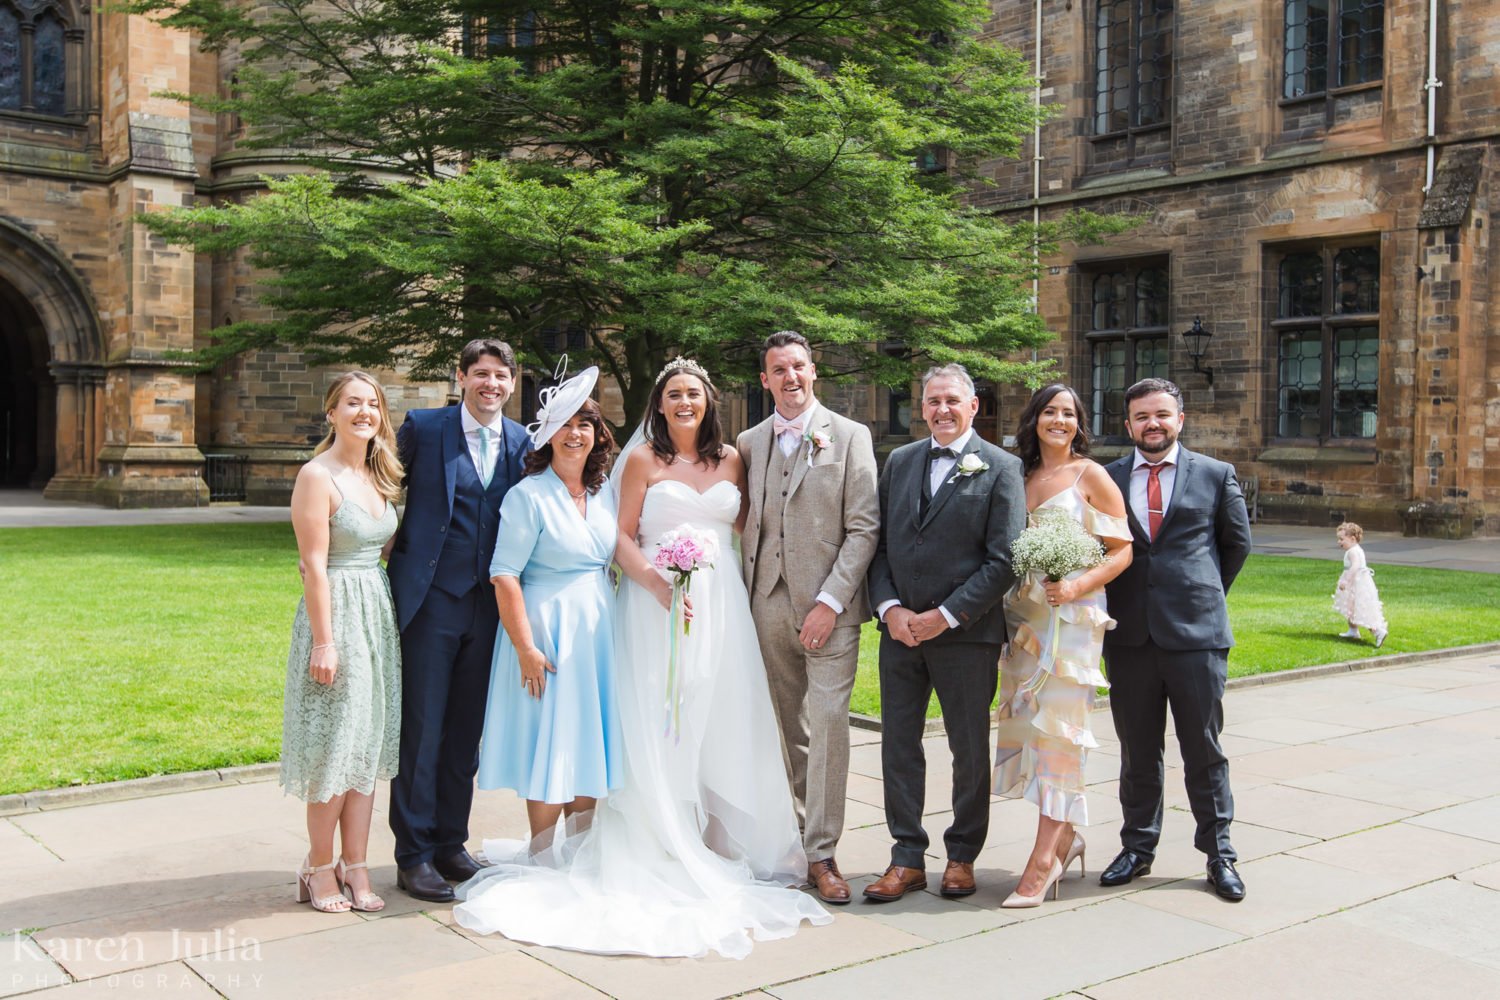 Wedding party group photo in the Quadrangle at University of Glasgow